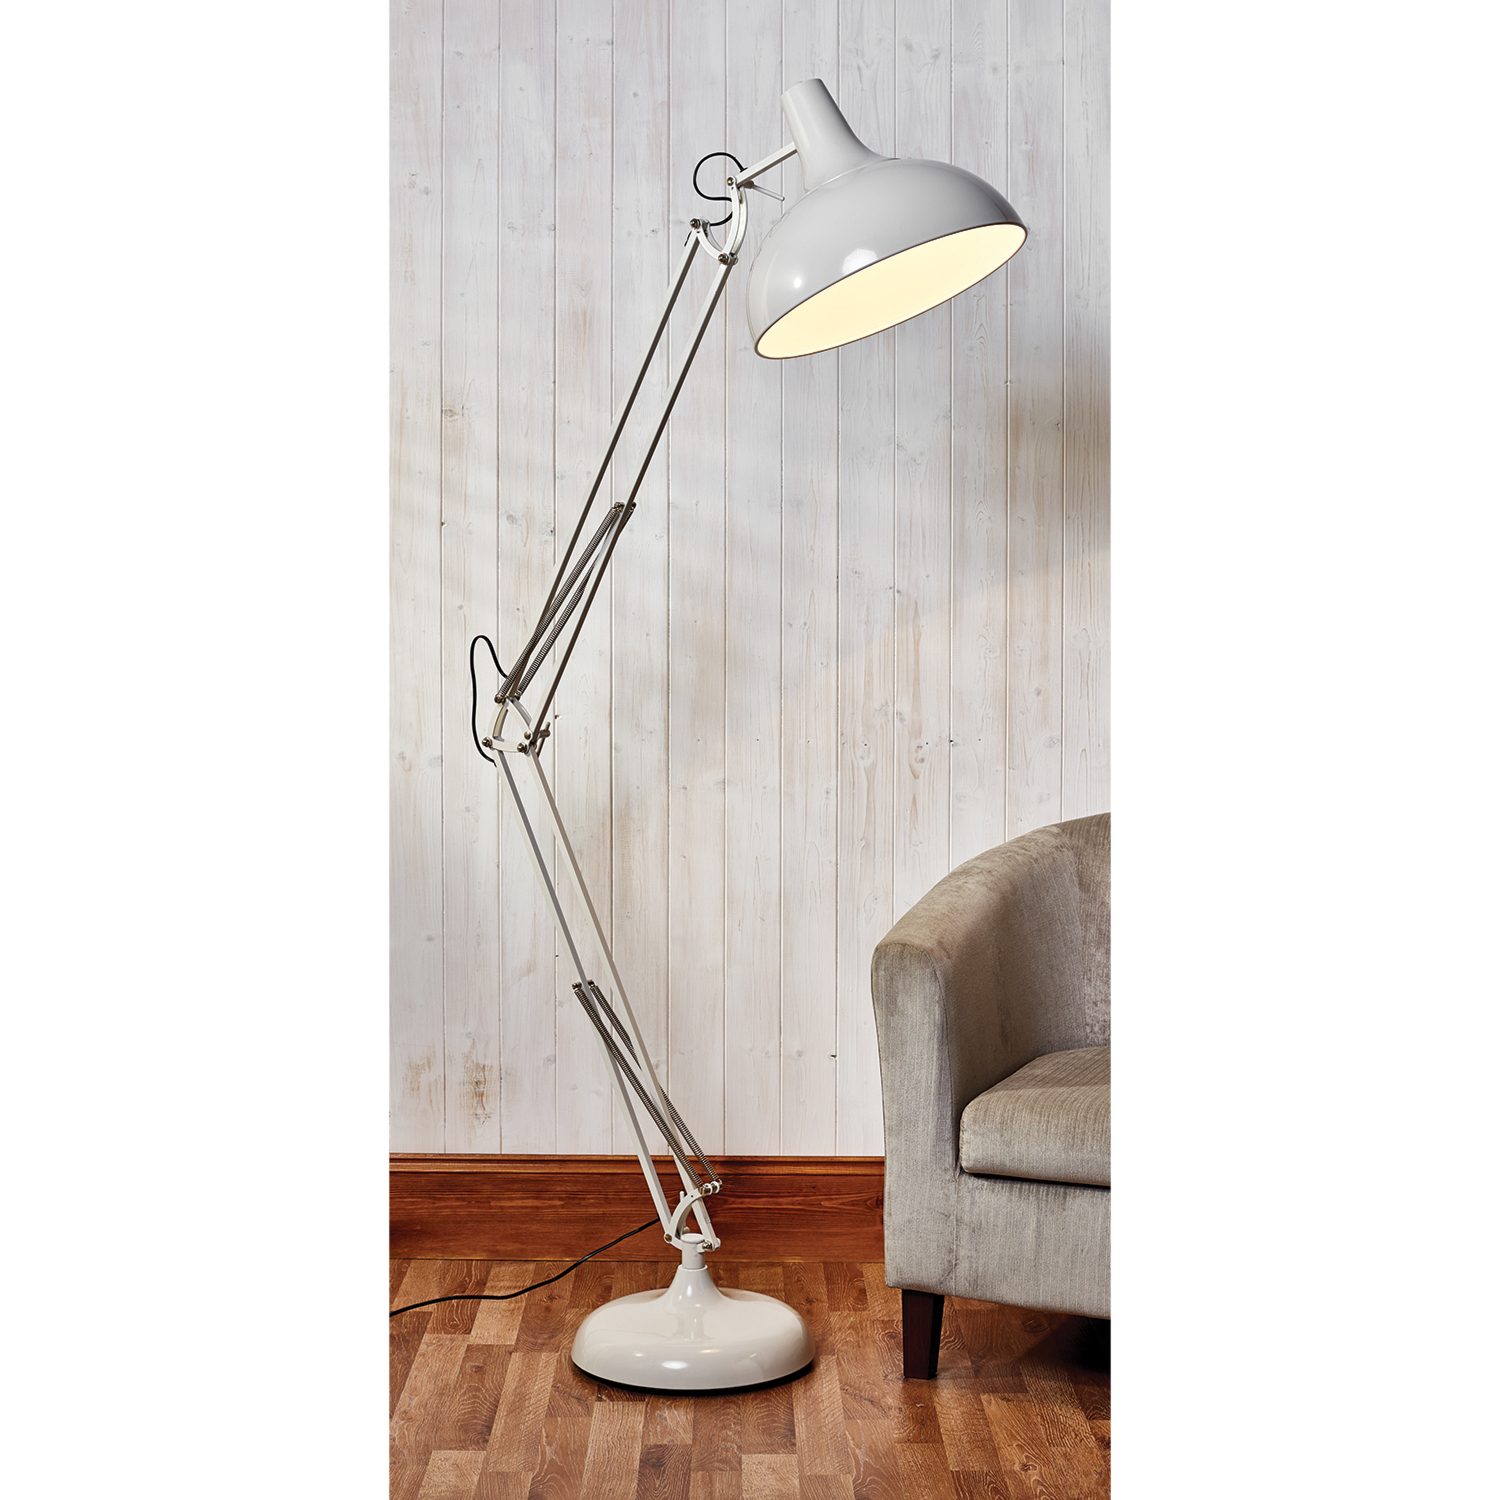 Giant Retro Floor Lamp throughout proportions 1500 X 1500